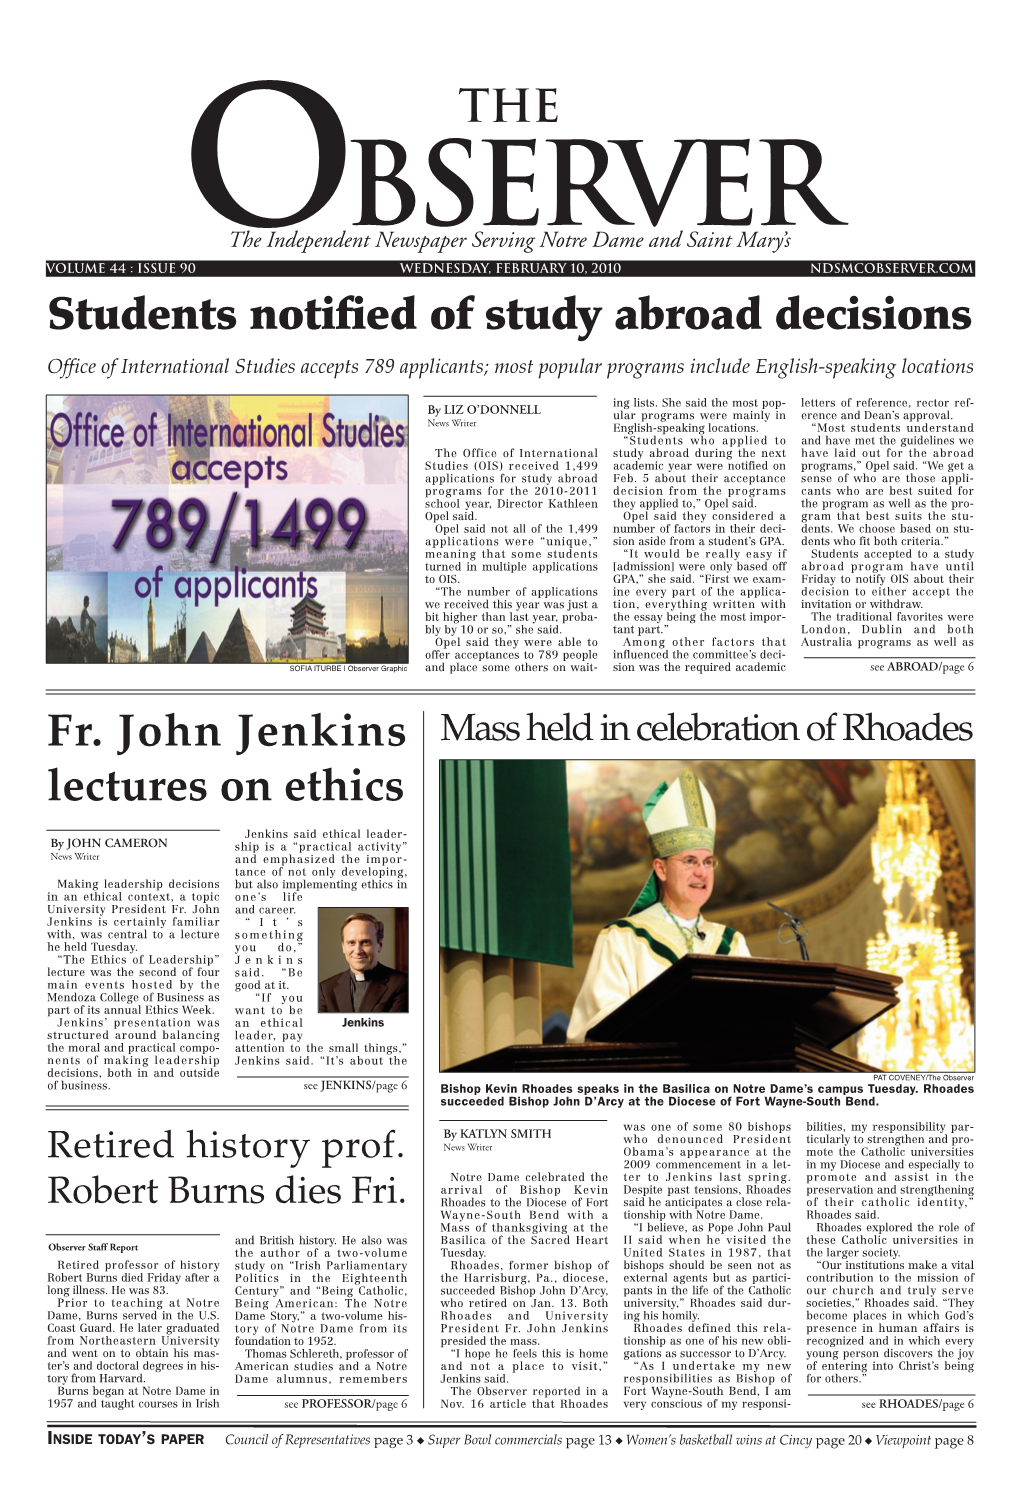 Students Notified of Study Abroad Decisions Fr. John Jenkins Lectures